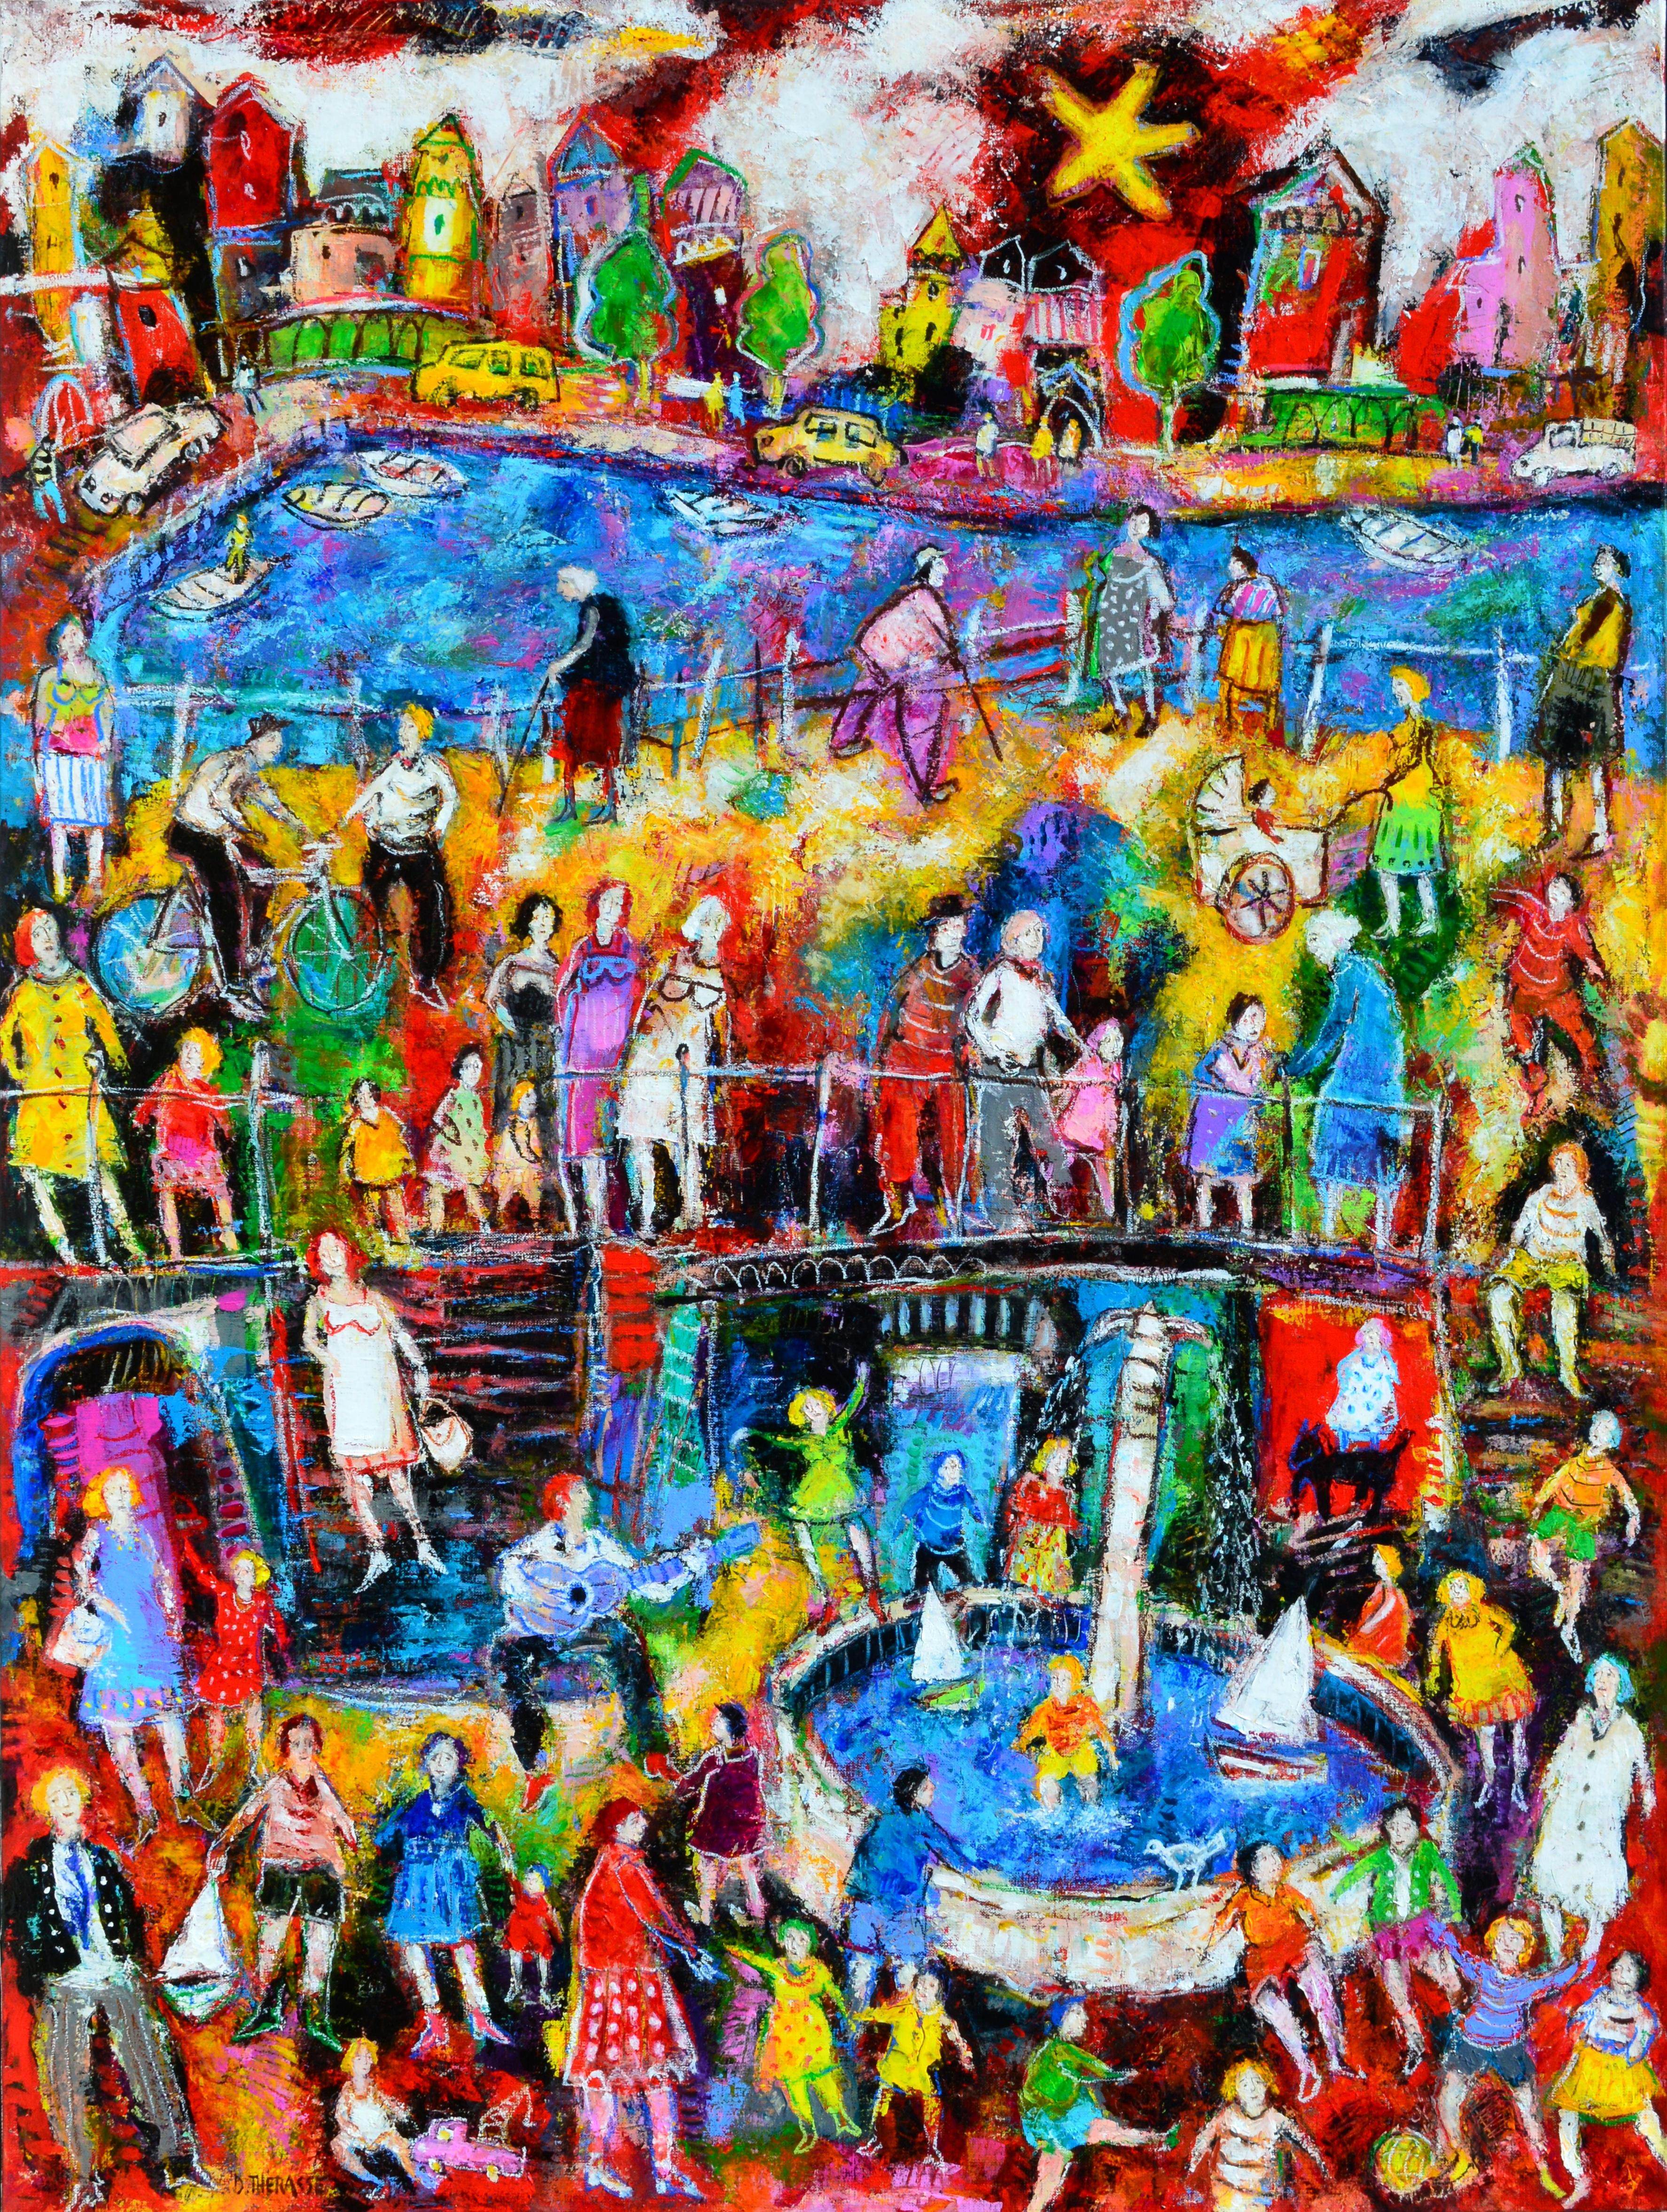 Daniel Thérasse Figurative Painting - "Port Fountain", Colorful Life Scene Poetic Figuration Mixed Media Painting 